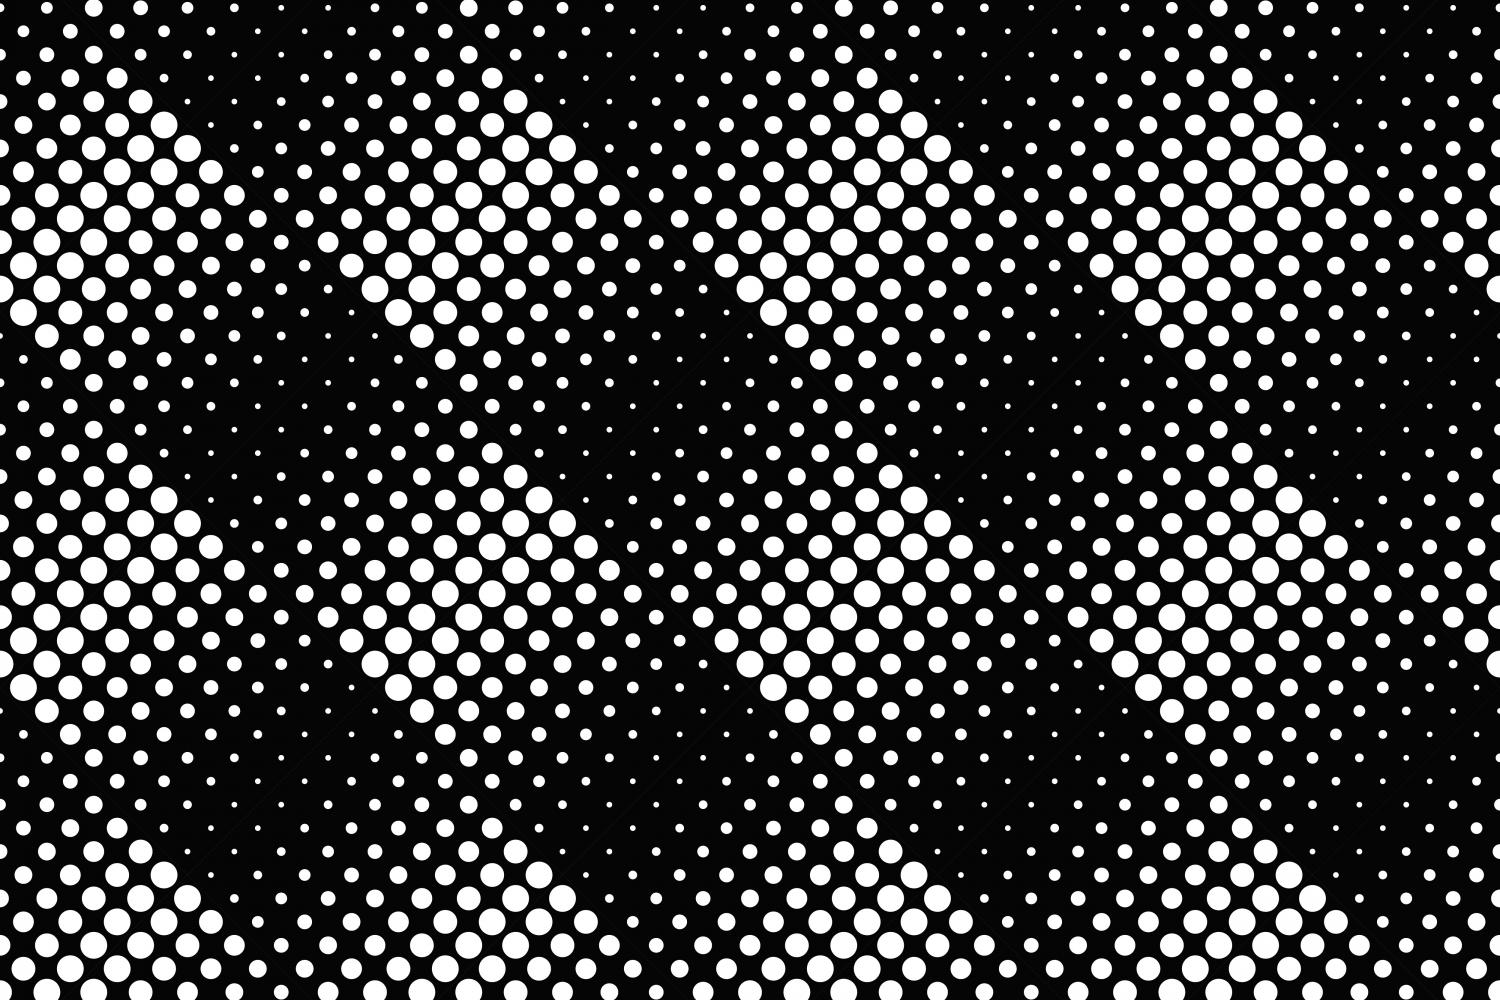 What Is Dot Pattern